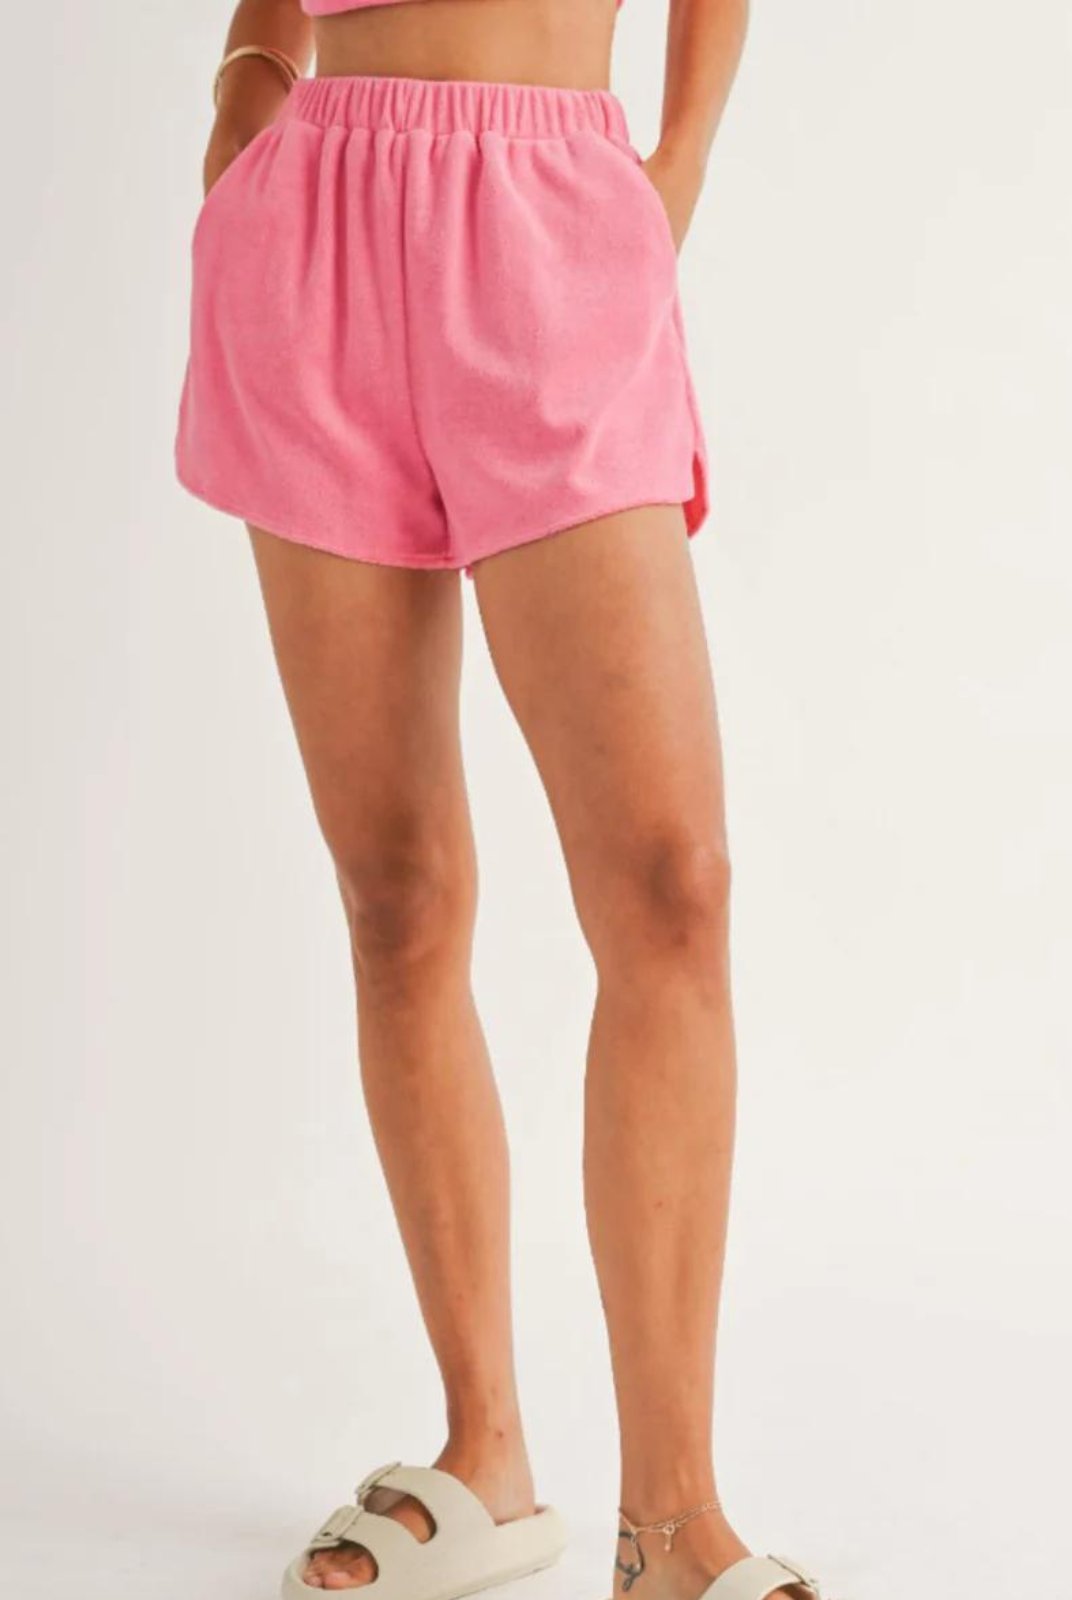 Sadie & Sage Terry Cloth Shorts. Discover comfort and style with Women's Sadie & Sage Terry Shorts. Crafted with soft terry fabric, these shorts offer a cozy fit perfect for lounging or casual outings. Elevate your wardrobe with this versatile essential.